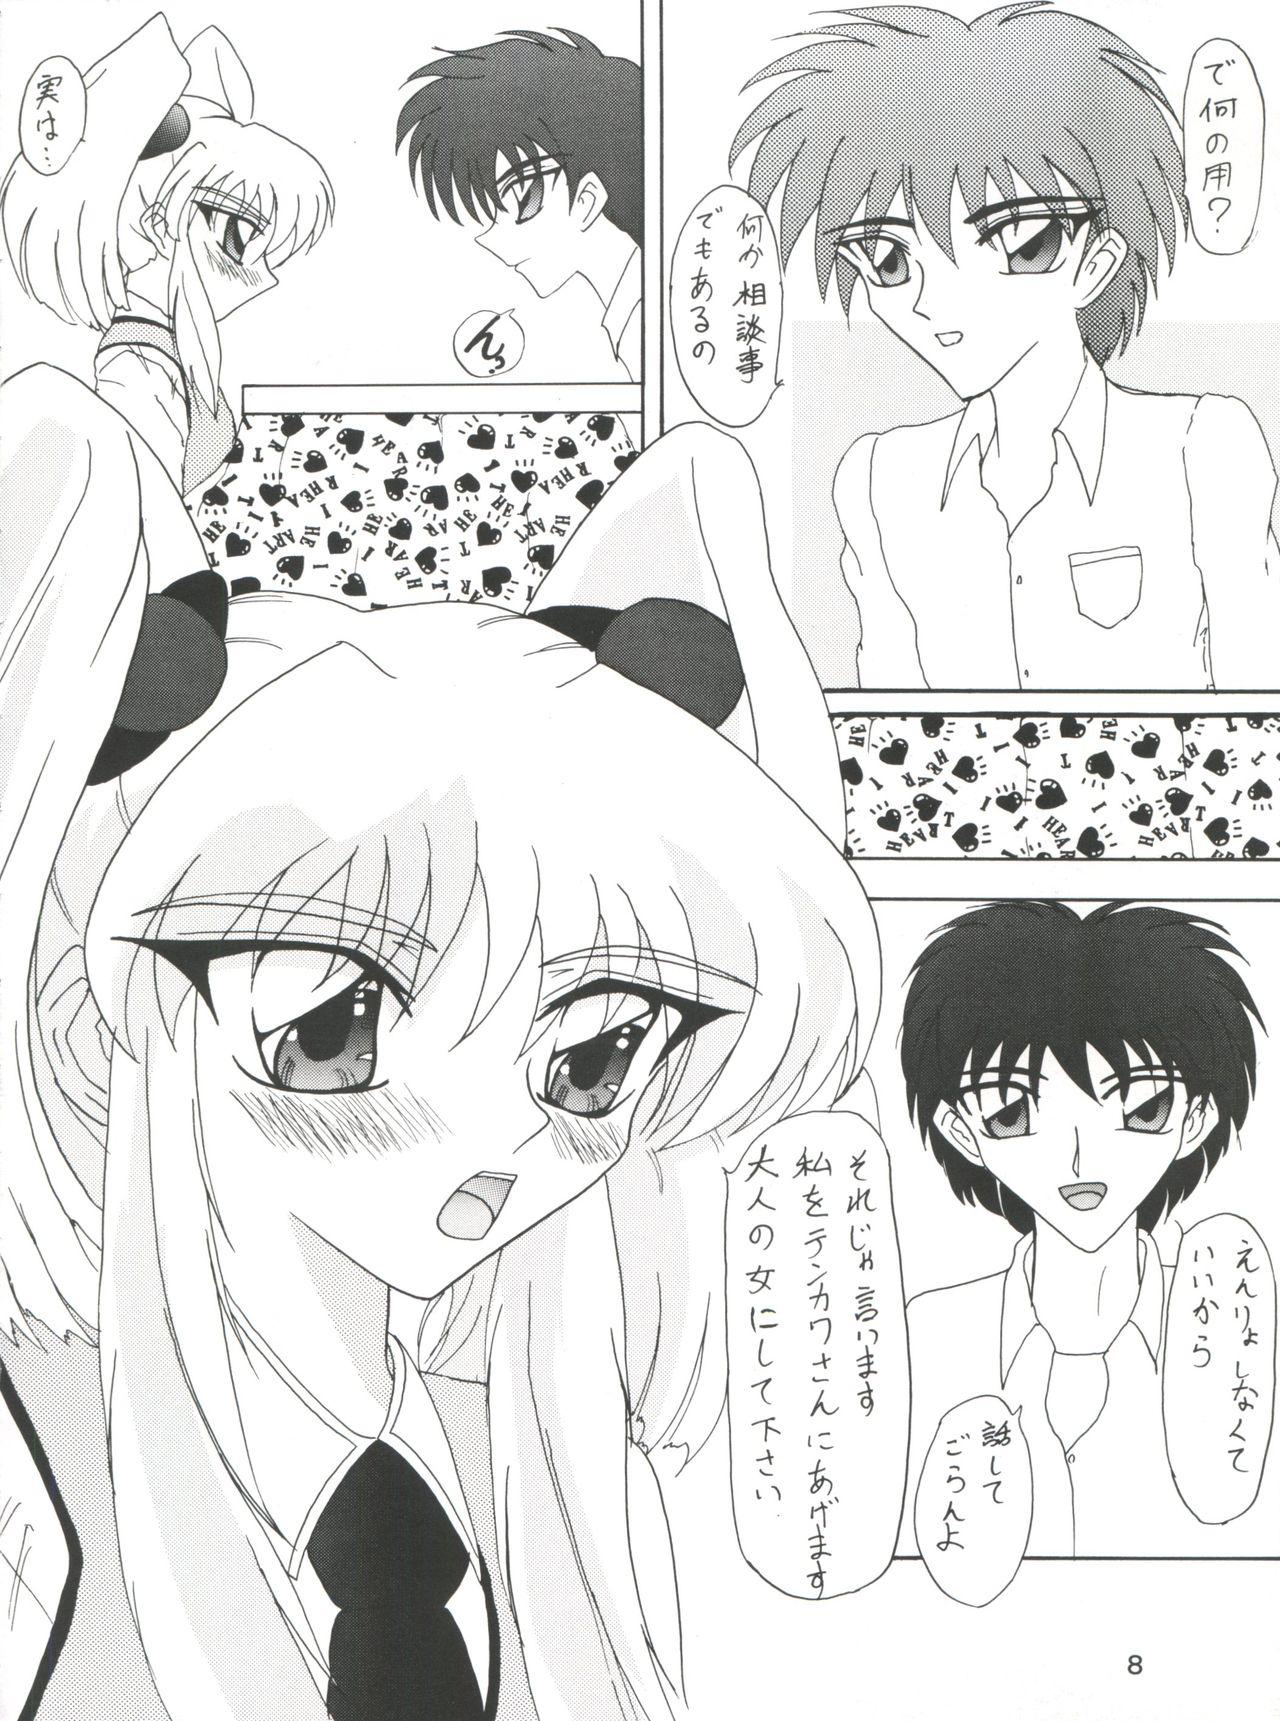 Babes PROMINENT 11 - Martian successor nadesico Spy - Page 8